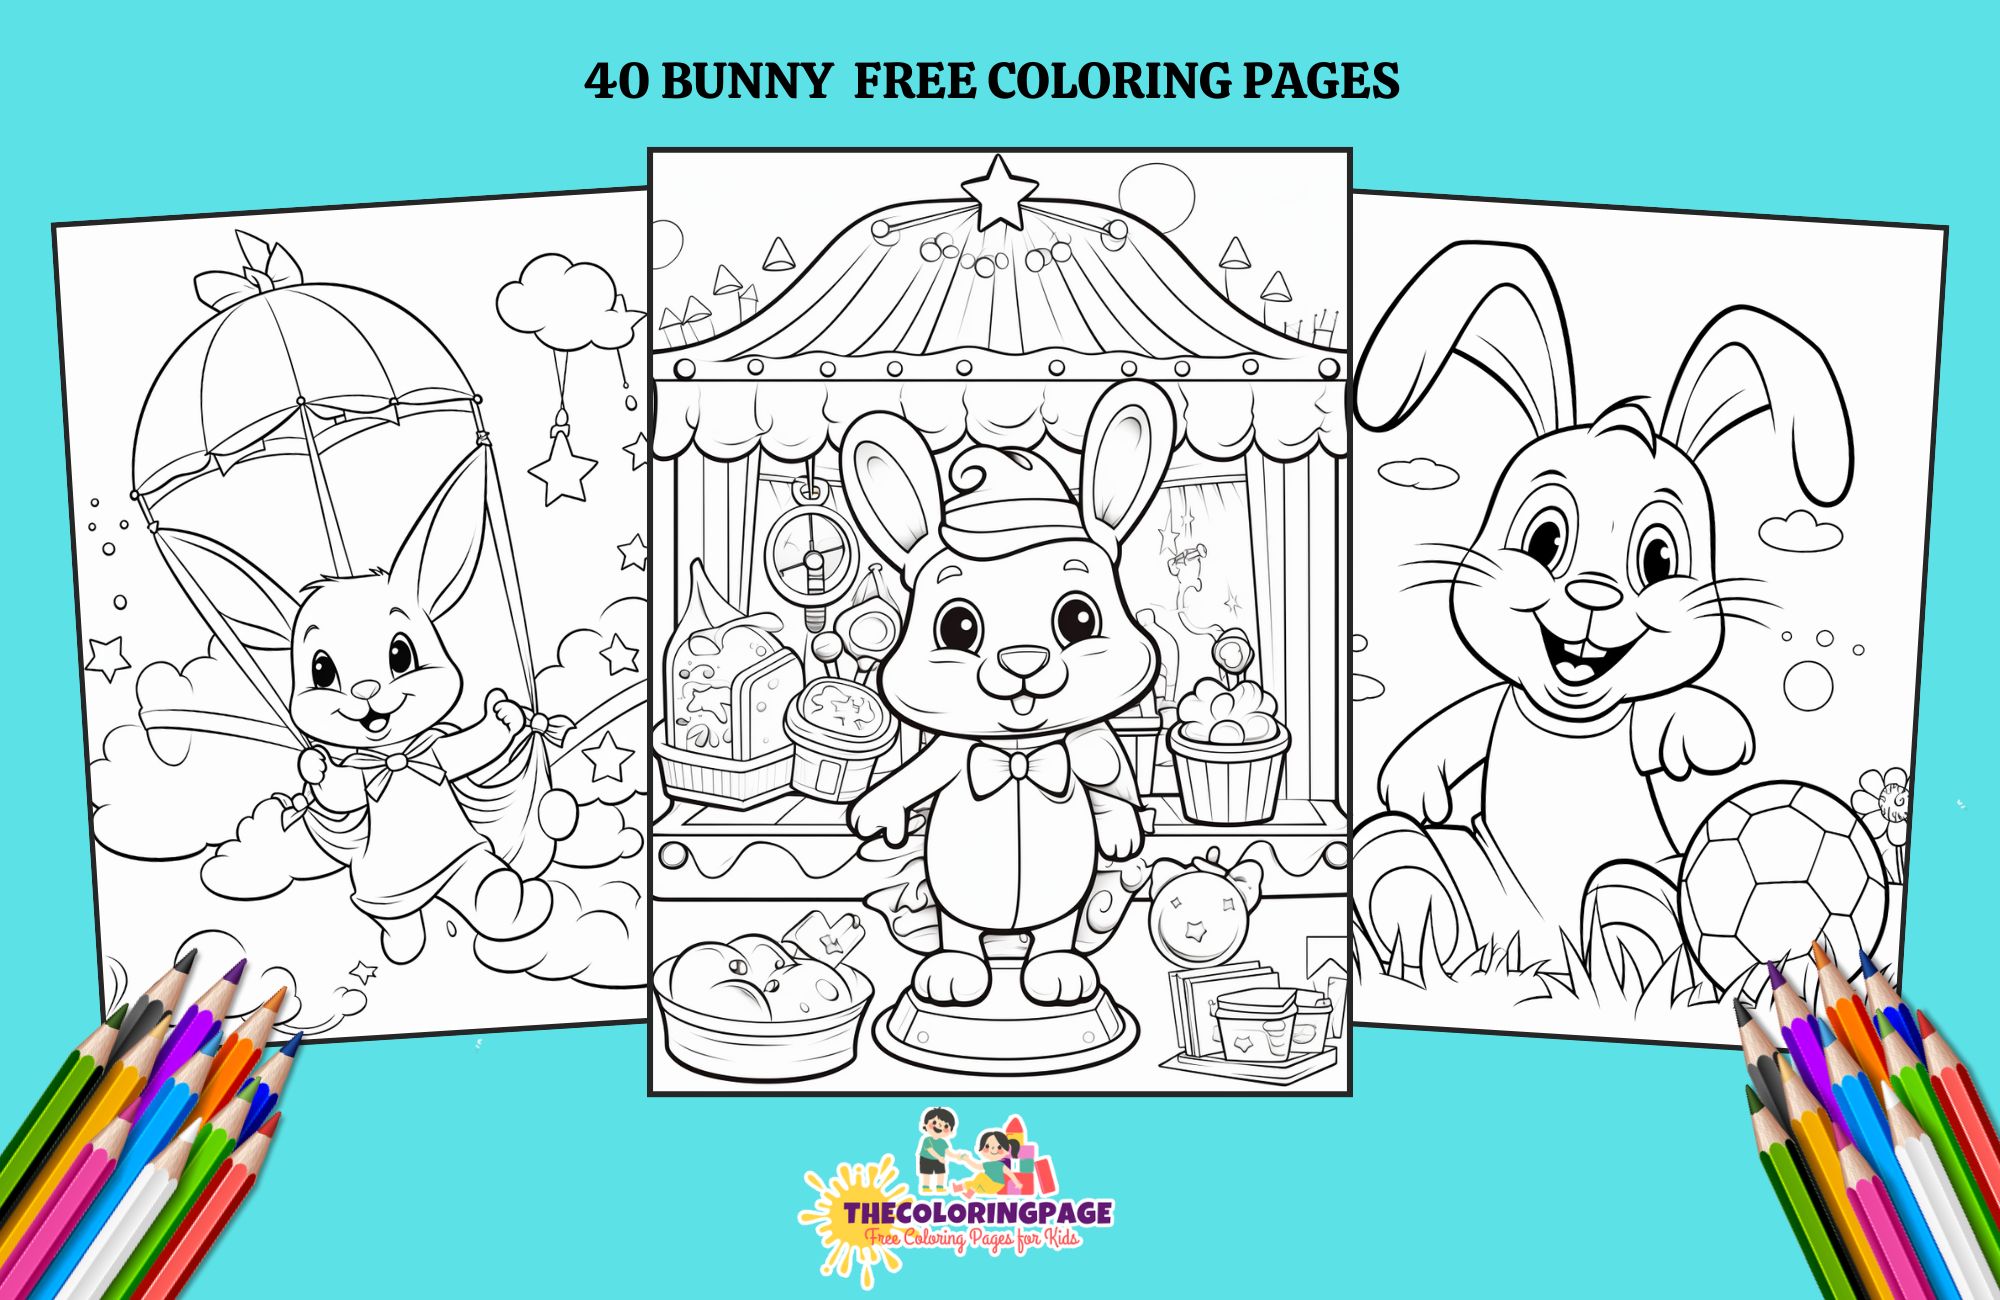 40 Free Bunny Coloring Pages